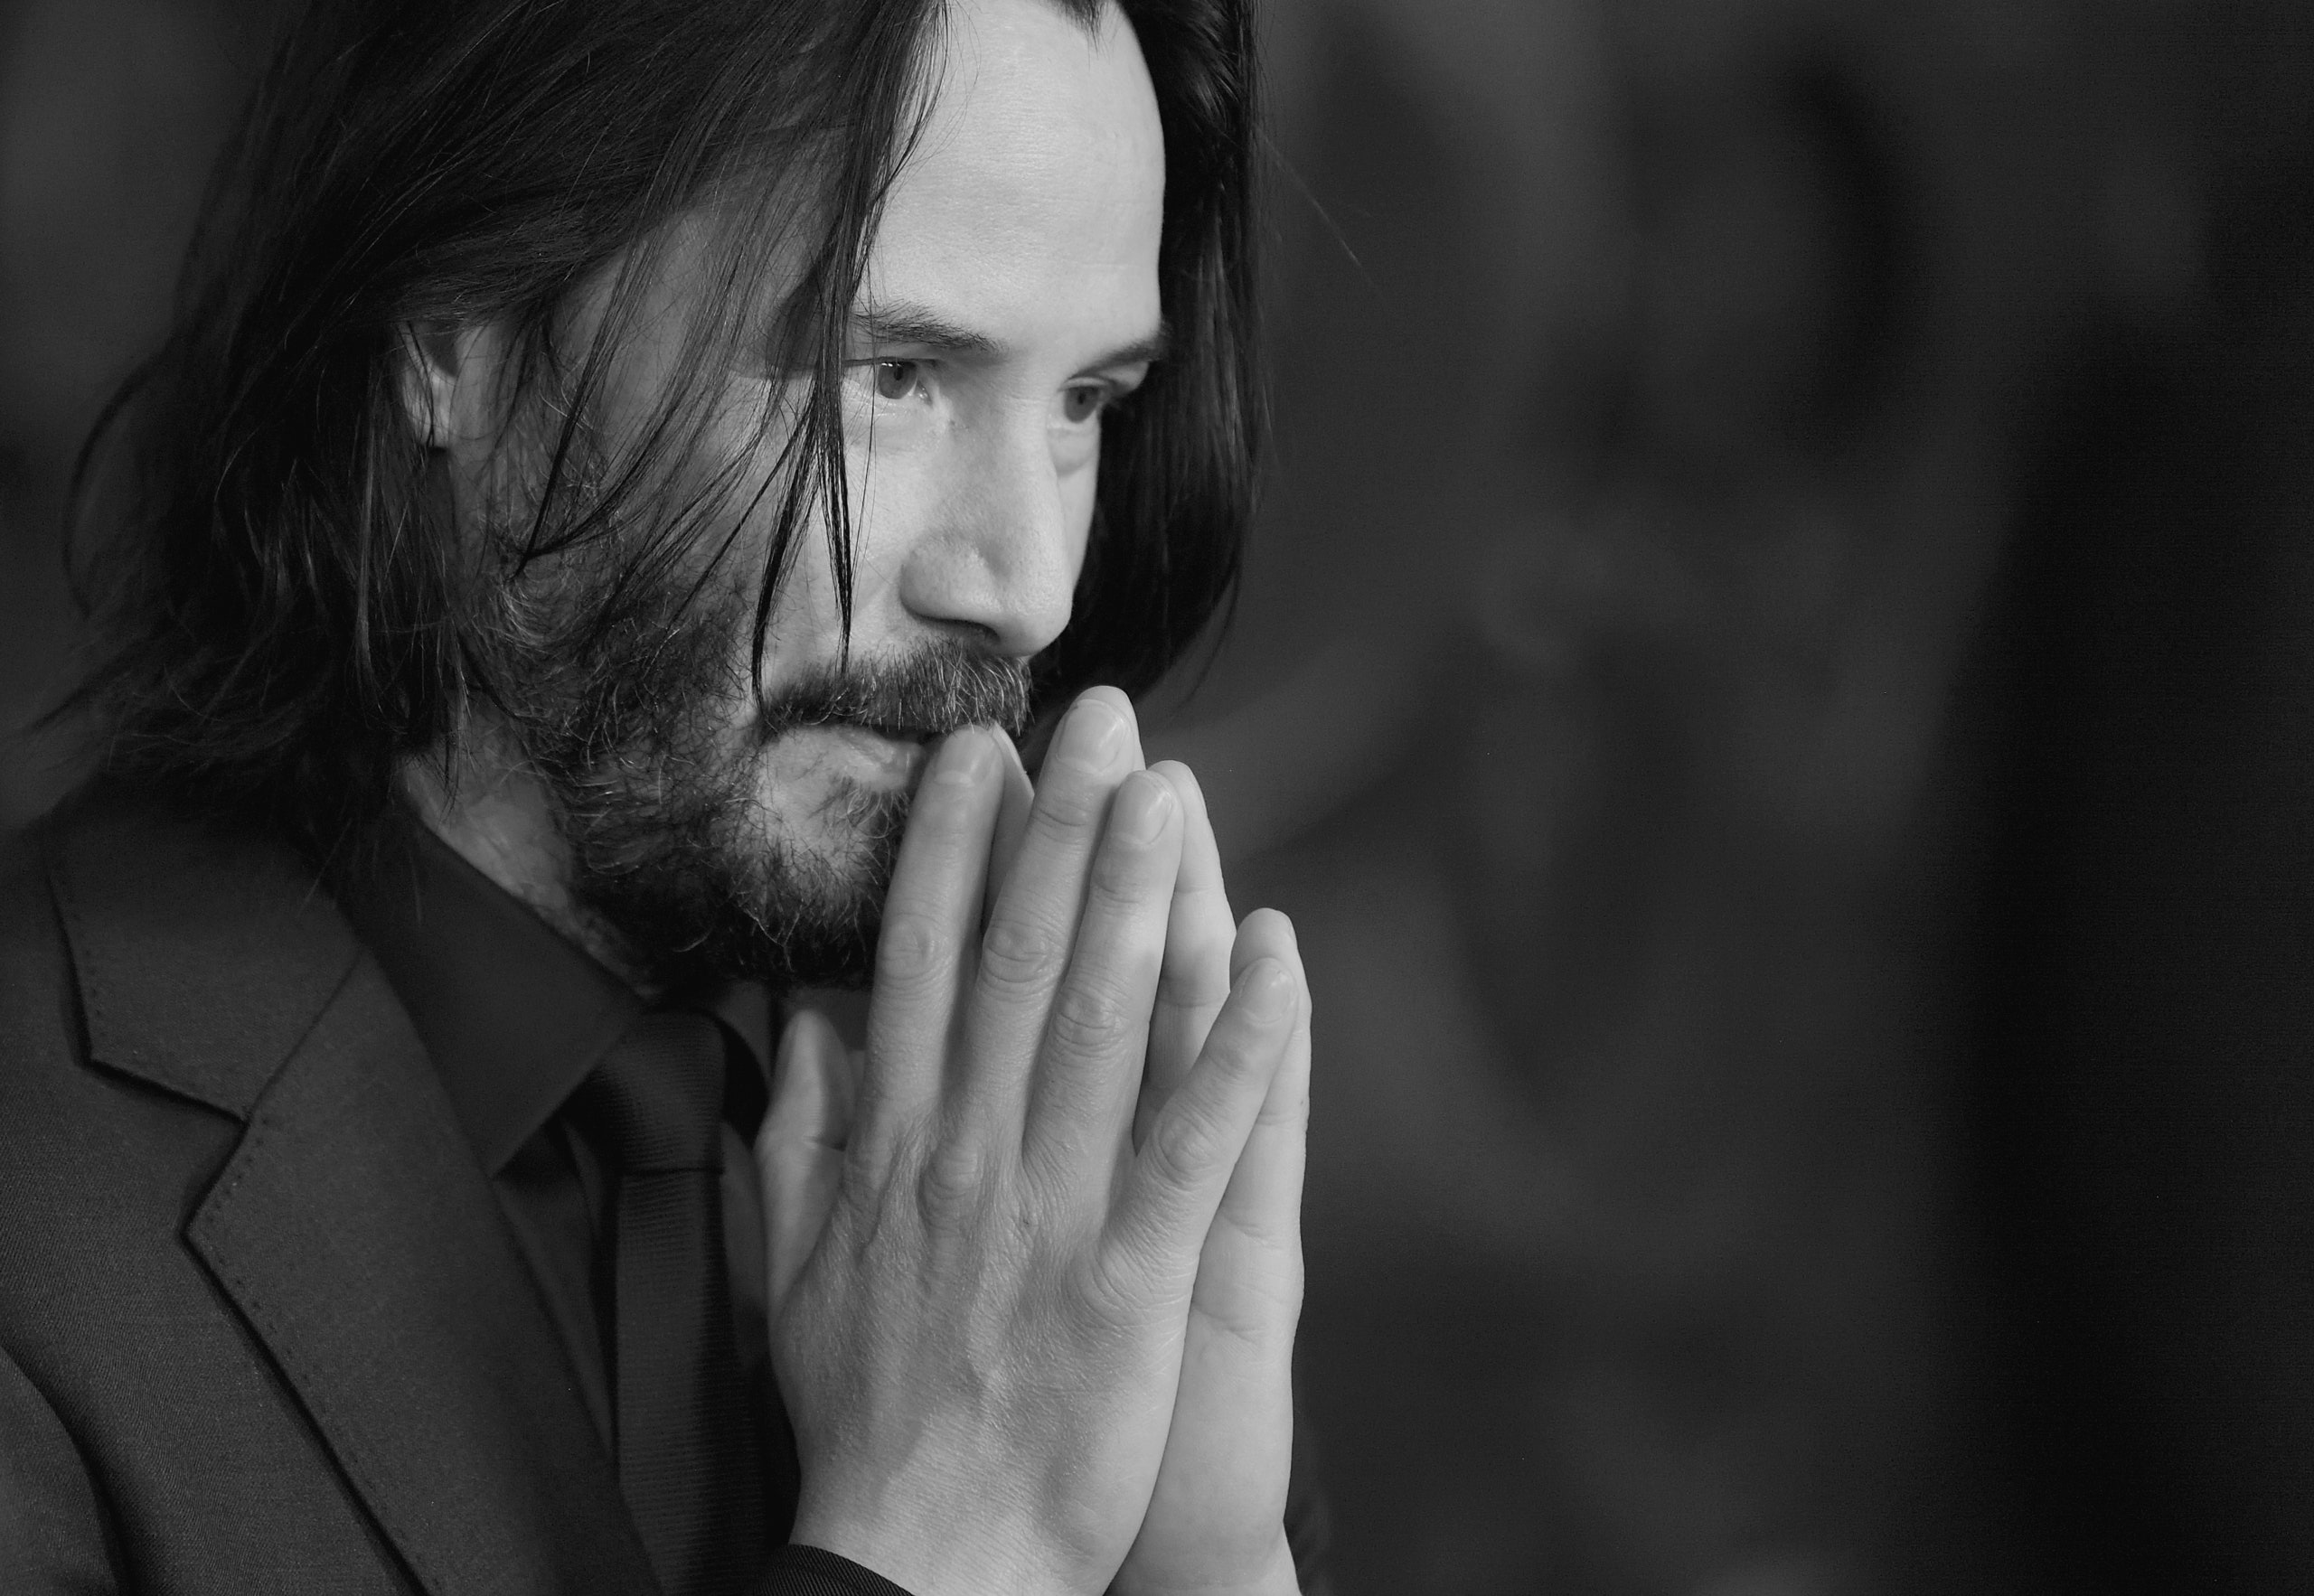 New Yorker 2019 – Keanu is too good for this world